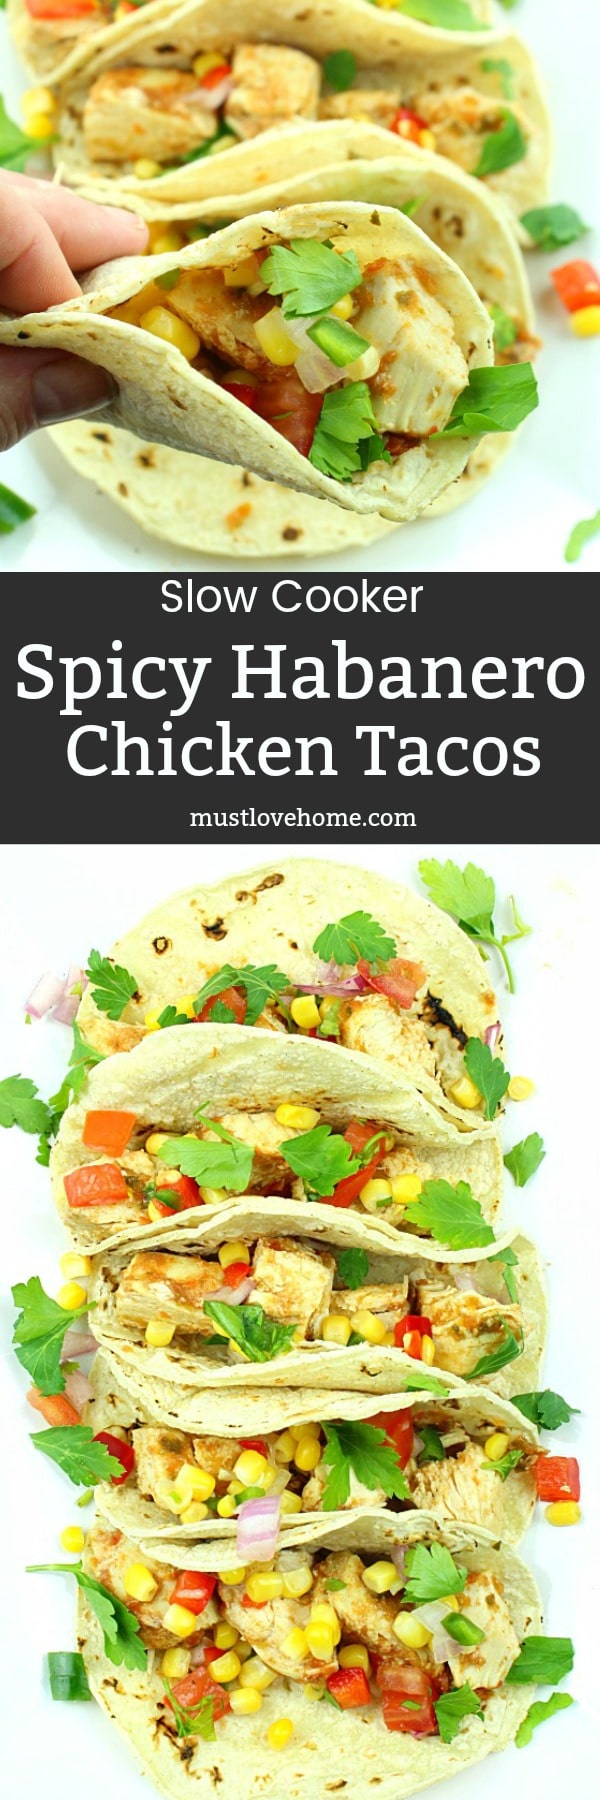 Get ready for Hot and Spicy with Slow Cooker Habanero Chicken Tacos. Piled high with chunks of juicy chicken and corn salsa, they are a smoldering treat for the taste buds!